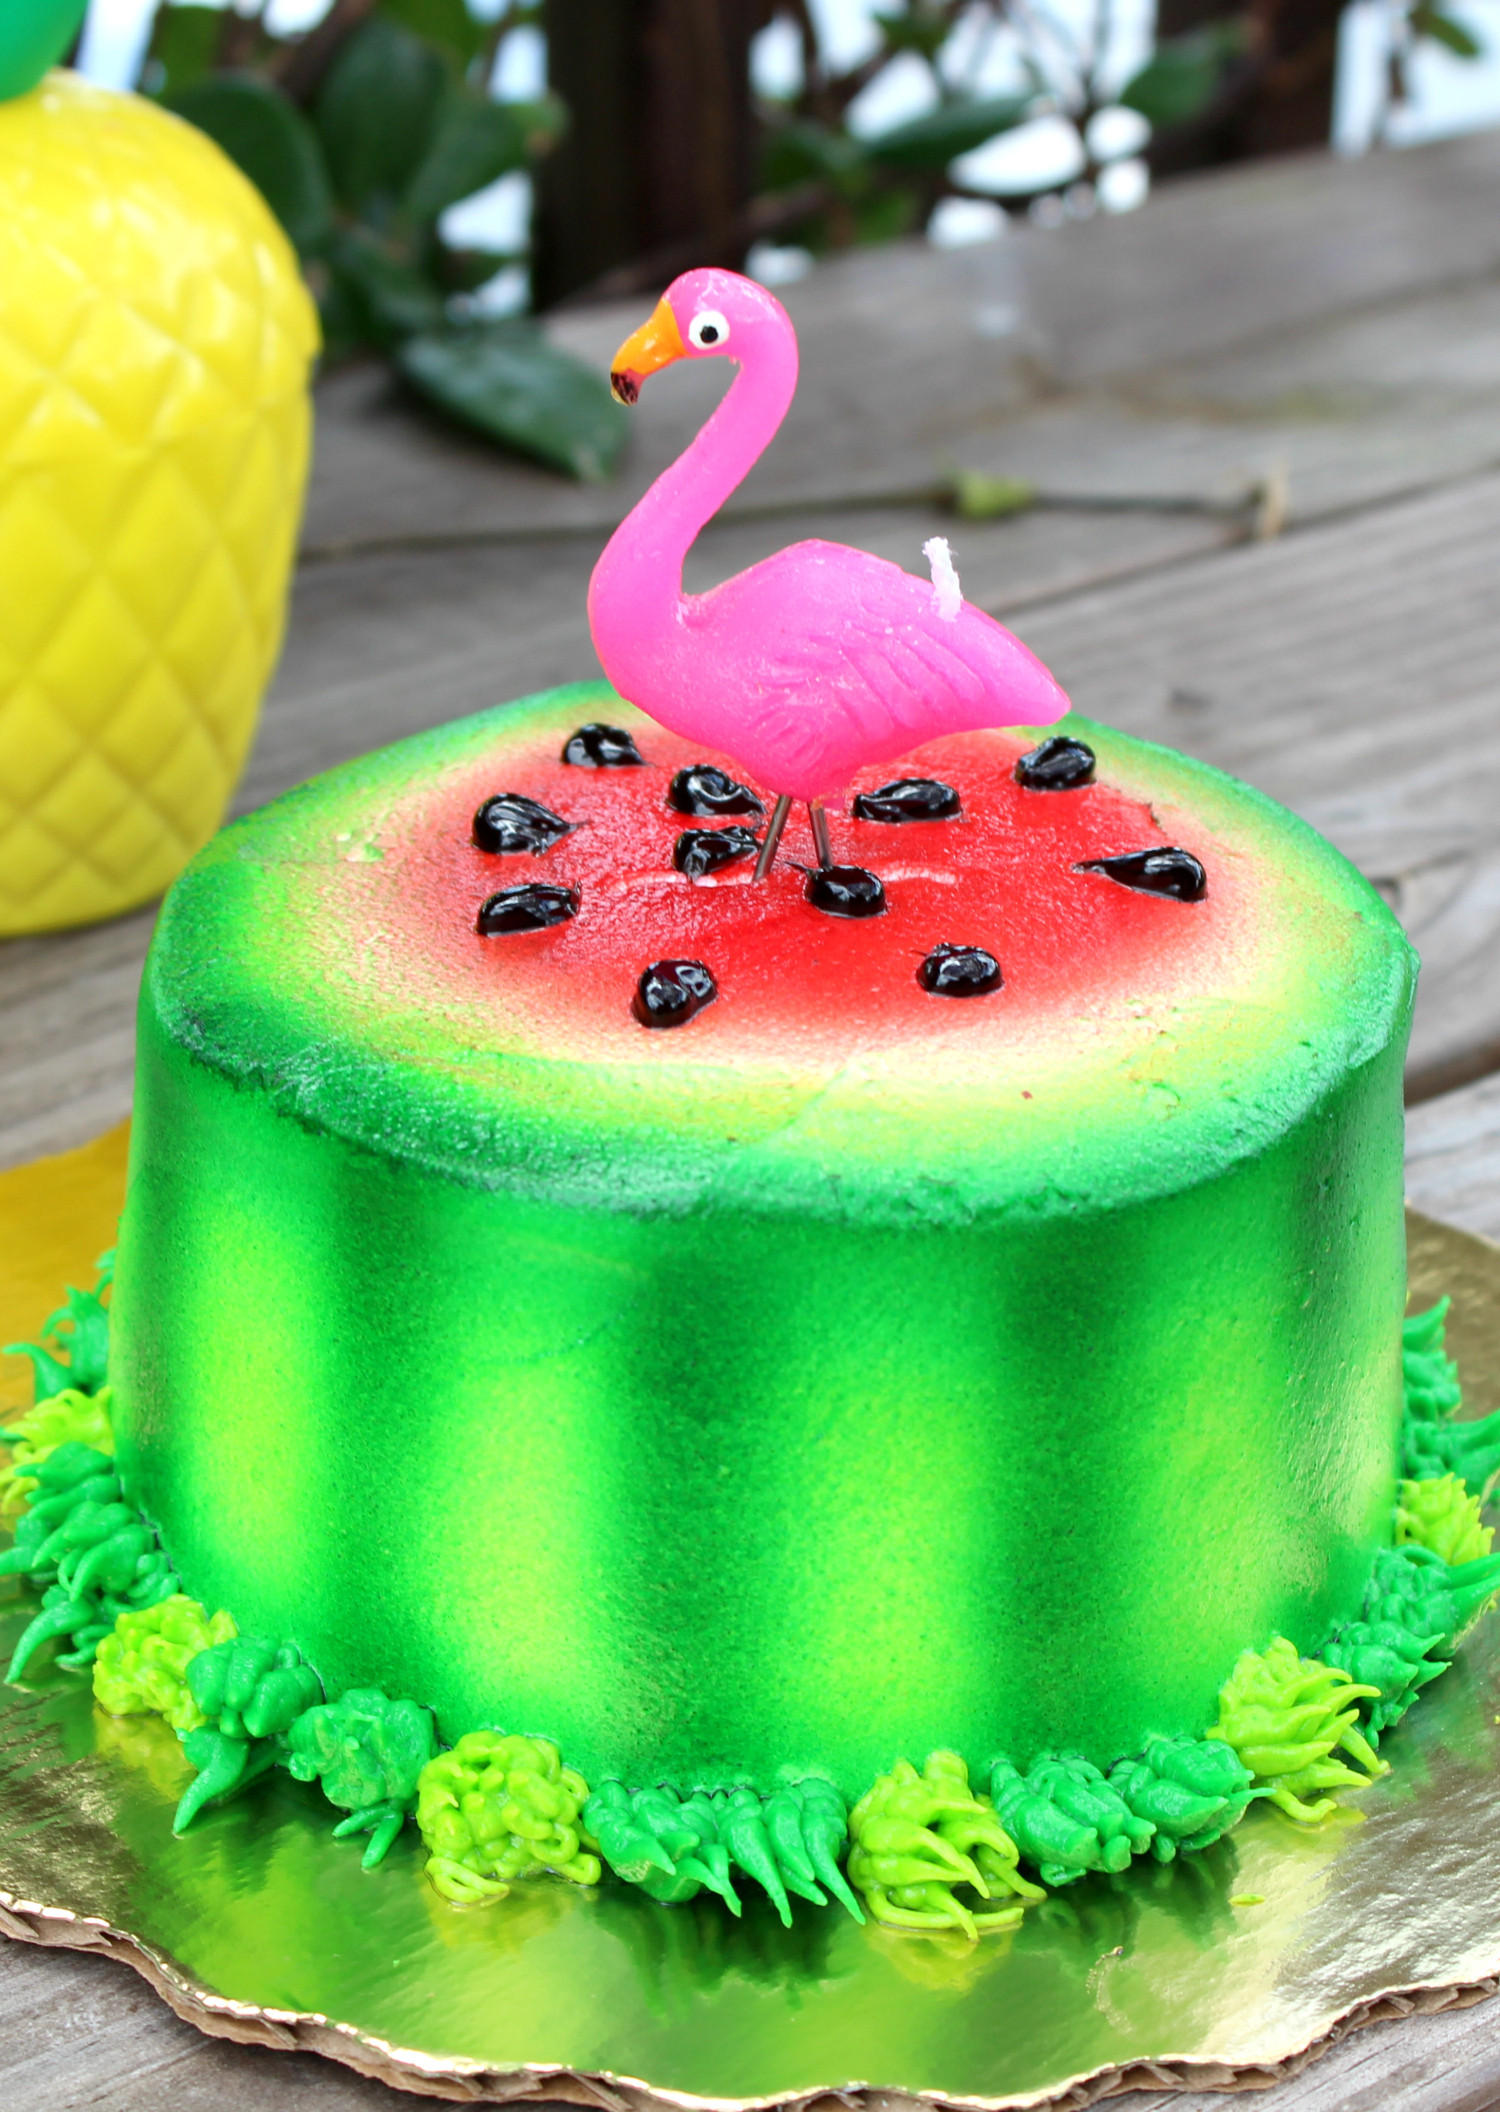 Pool Party Ideas Adults
 Fun Summer Pool Party Ideas for Adults